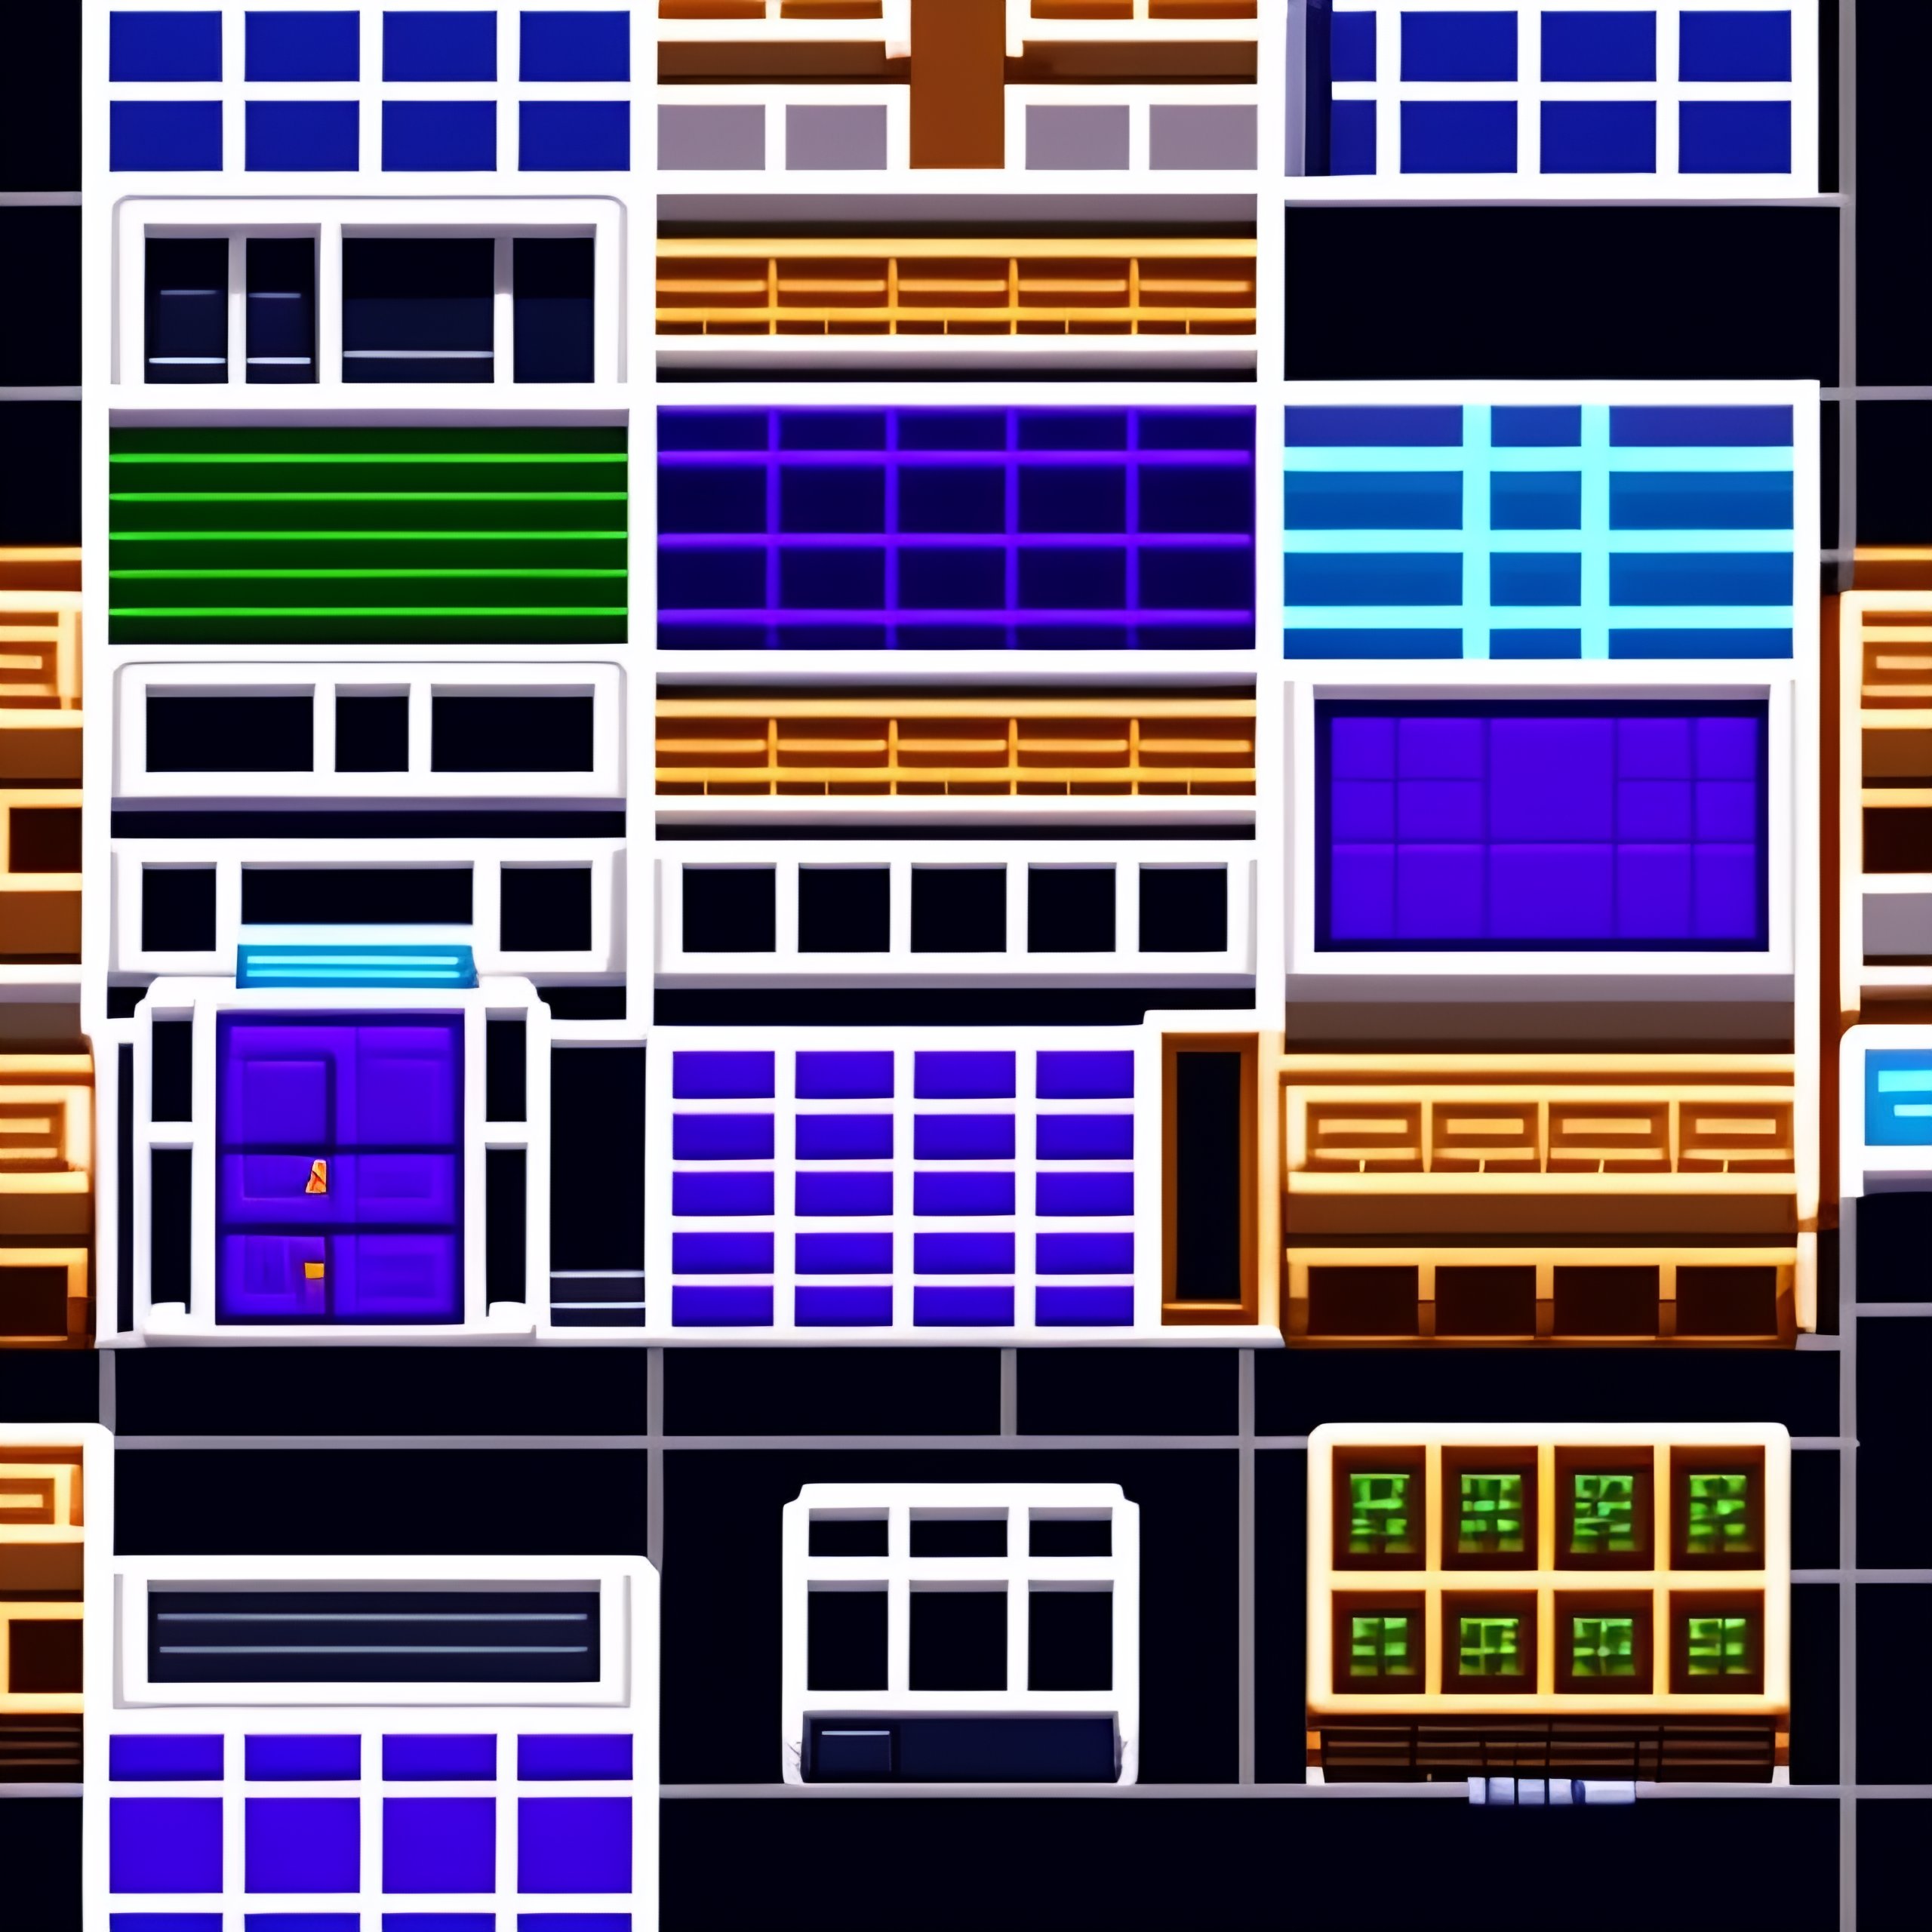 Lexica - Pixel art, cyberpunk style, sci-fi, spritesheet, grid 32x32,  street tiles, high quality, without distortion, no filtering, different  surface